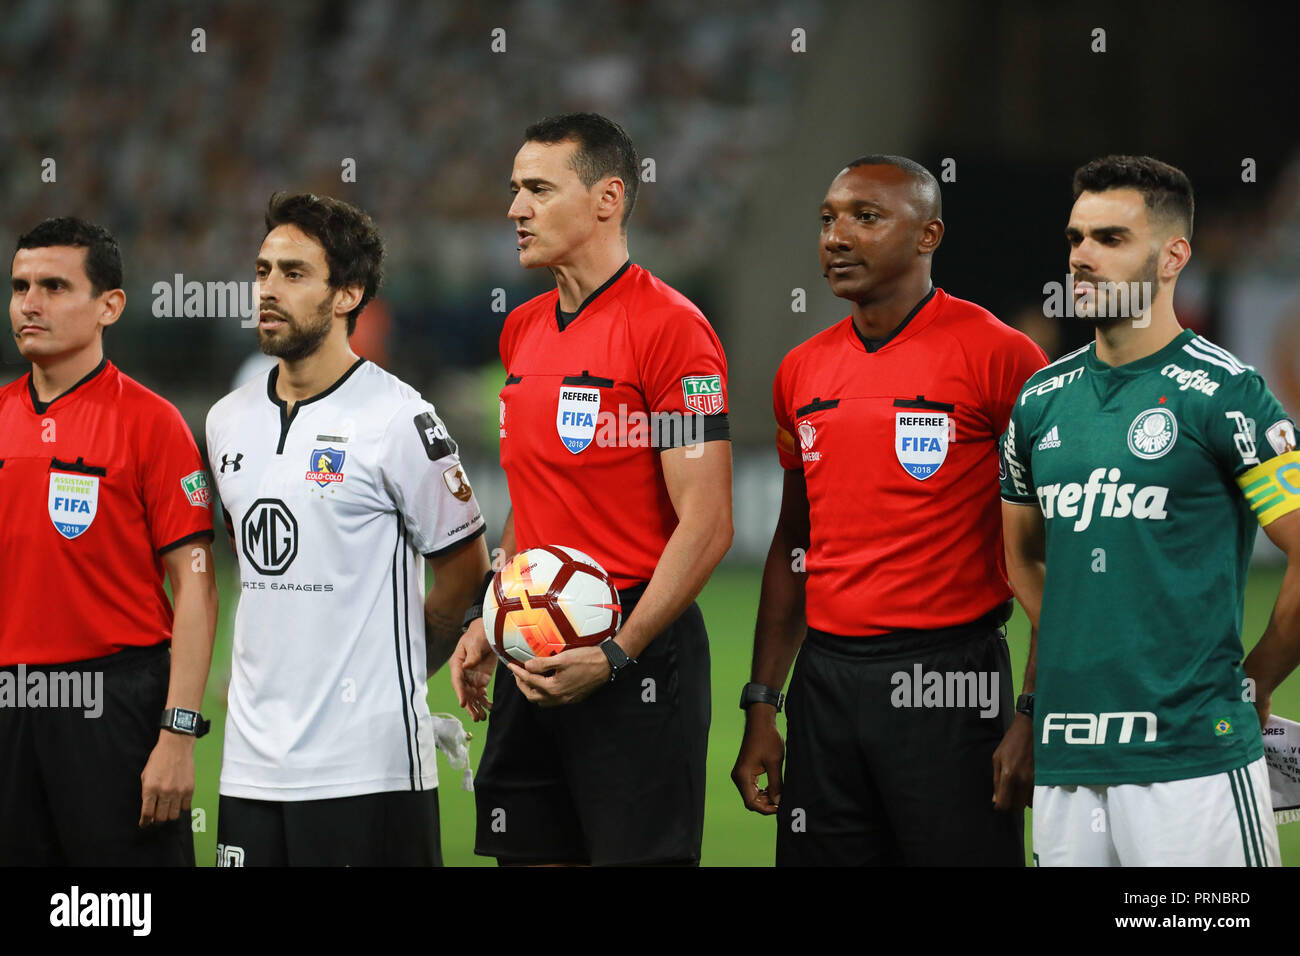 SÃO PAULO, SP - 03.10.2018: PALMEIRAS X COLO COLO - Referee Wilmar Roldán (COL) between captains Jorge Valdivia and Bruno Henrique during the match between Palmeiras and Colo-Colo (CHI) held at Allianz Park, West Zone of São Paulo. The match is the second match in the quarterfinals of the 2018 Copa Libertadores. (Photo: Ricardo Moreira/Fotoarena) Stock Photo